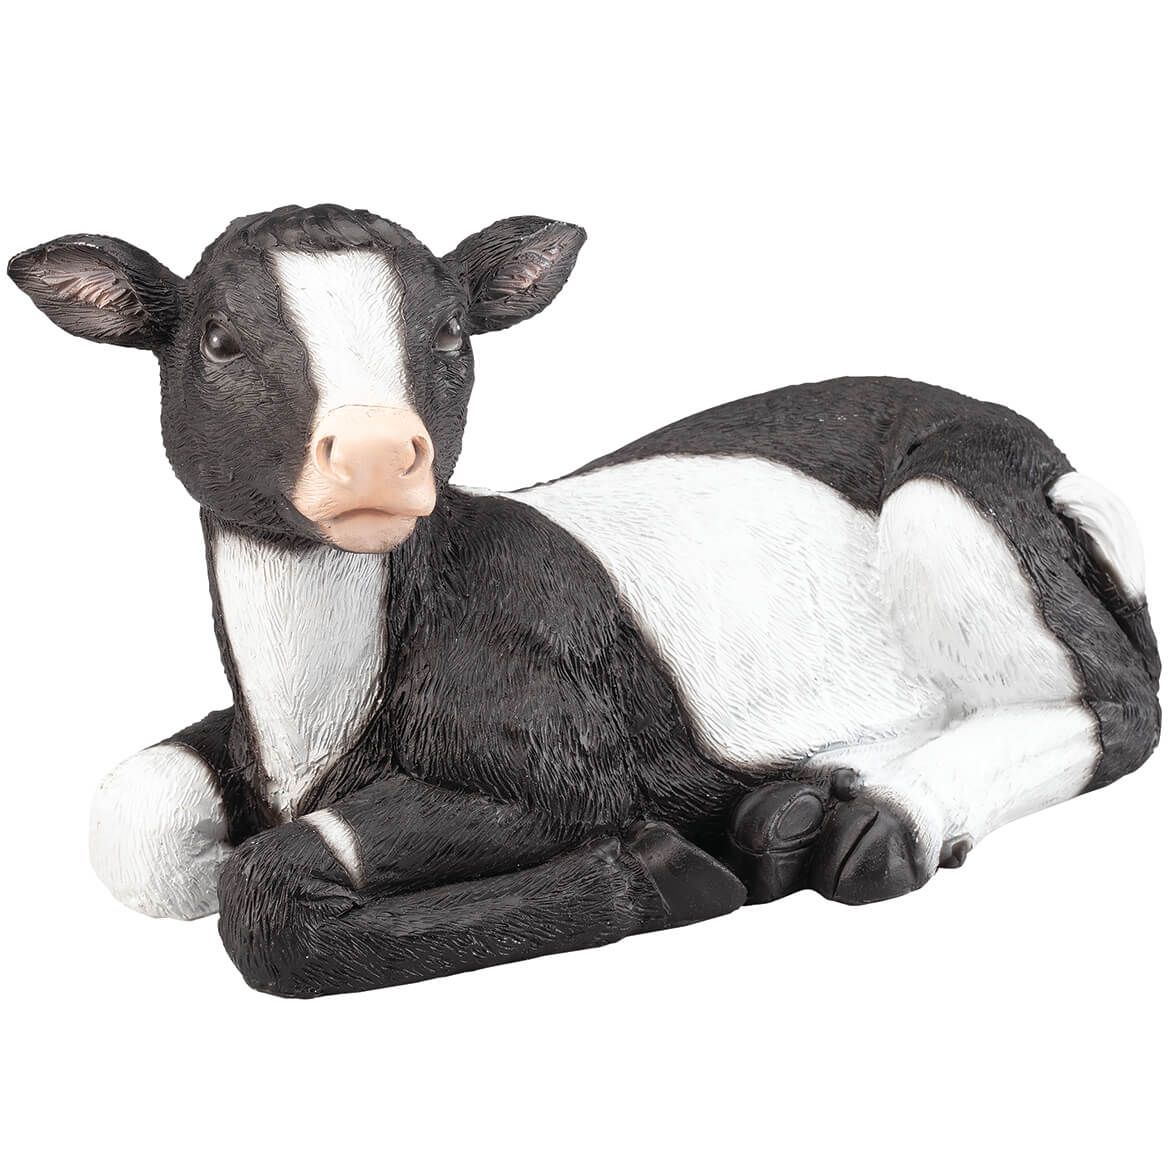 Resin Cow Statue + '-' + 369199